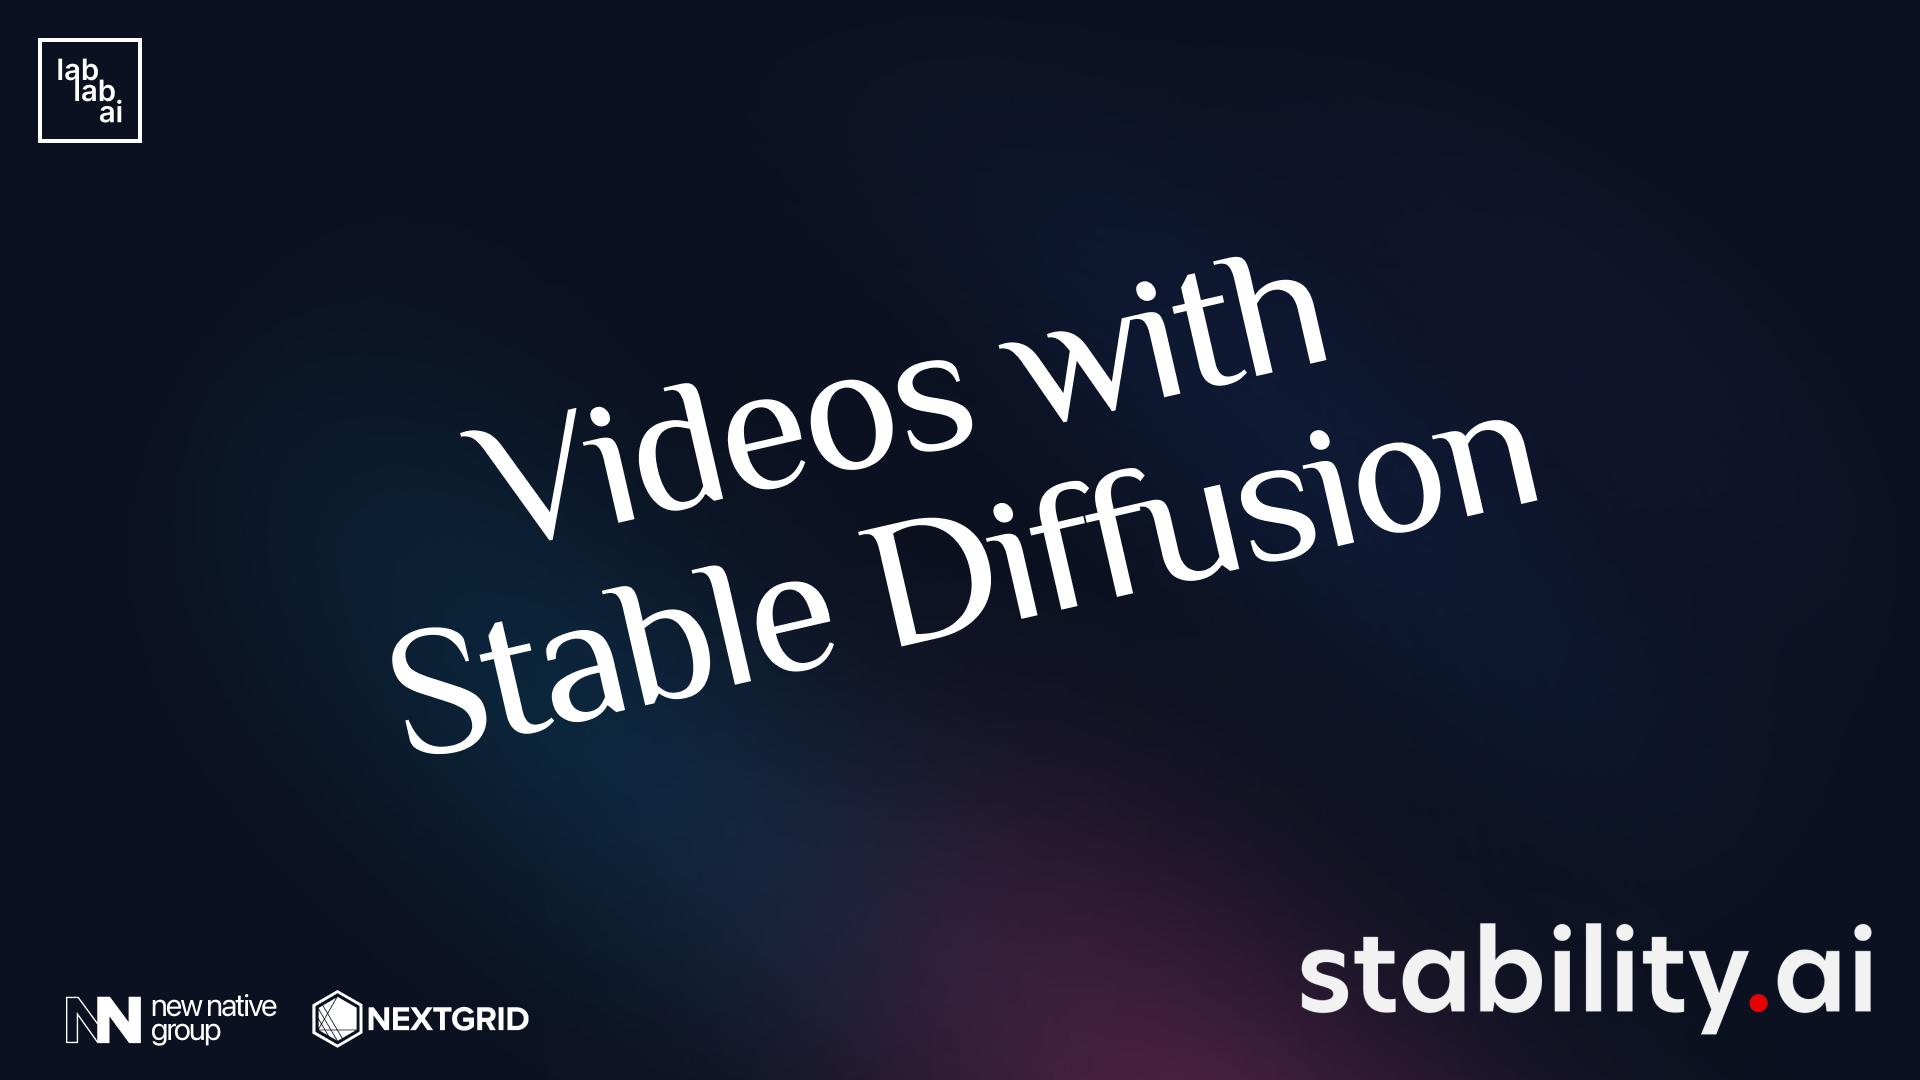 Stable Diffusion tutorial: How to make videos with Stable Diffusion? - Interpolation tutorial